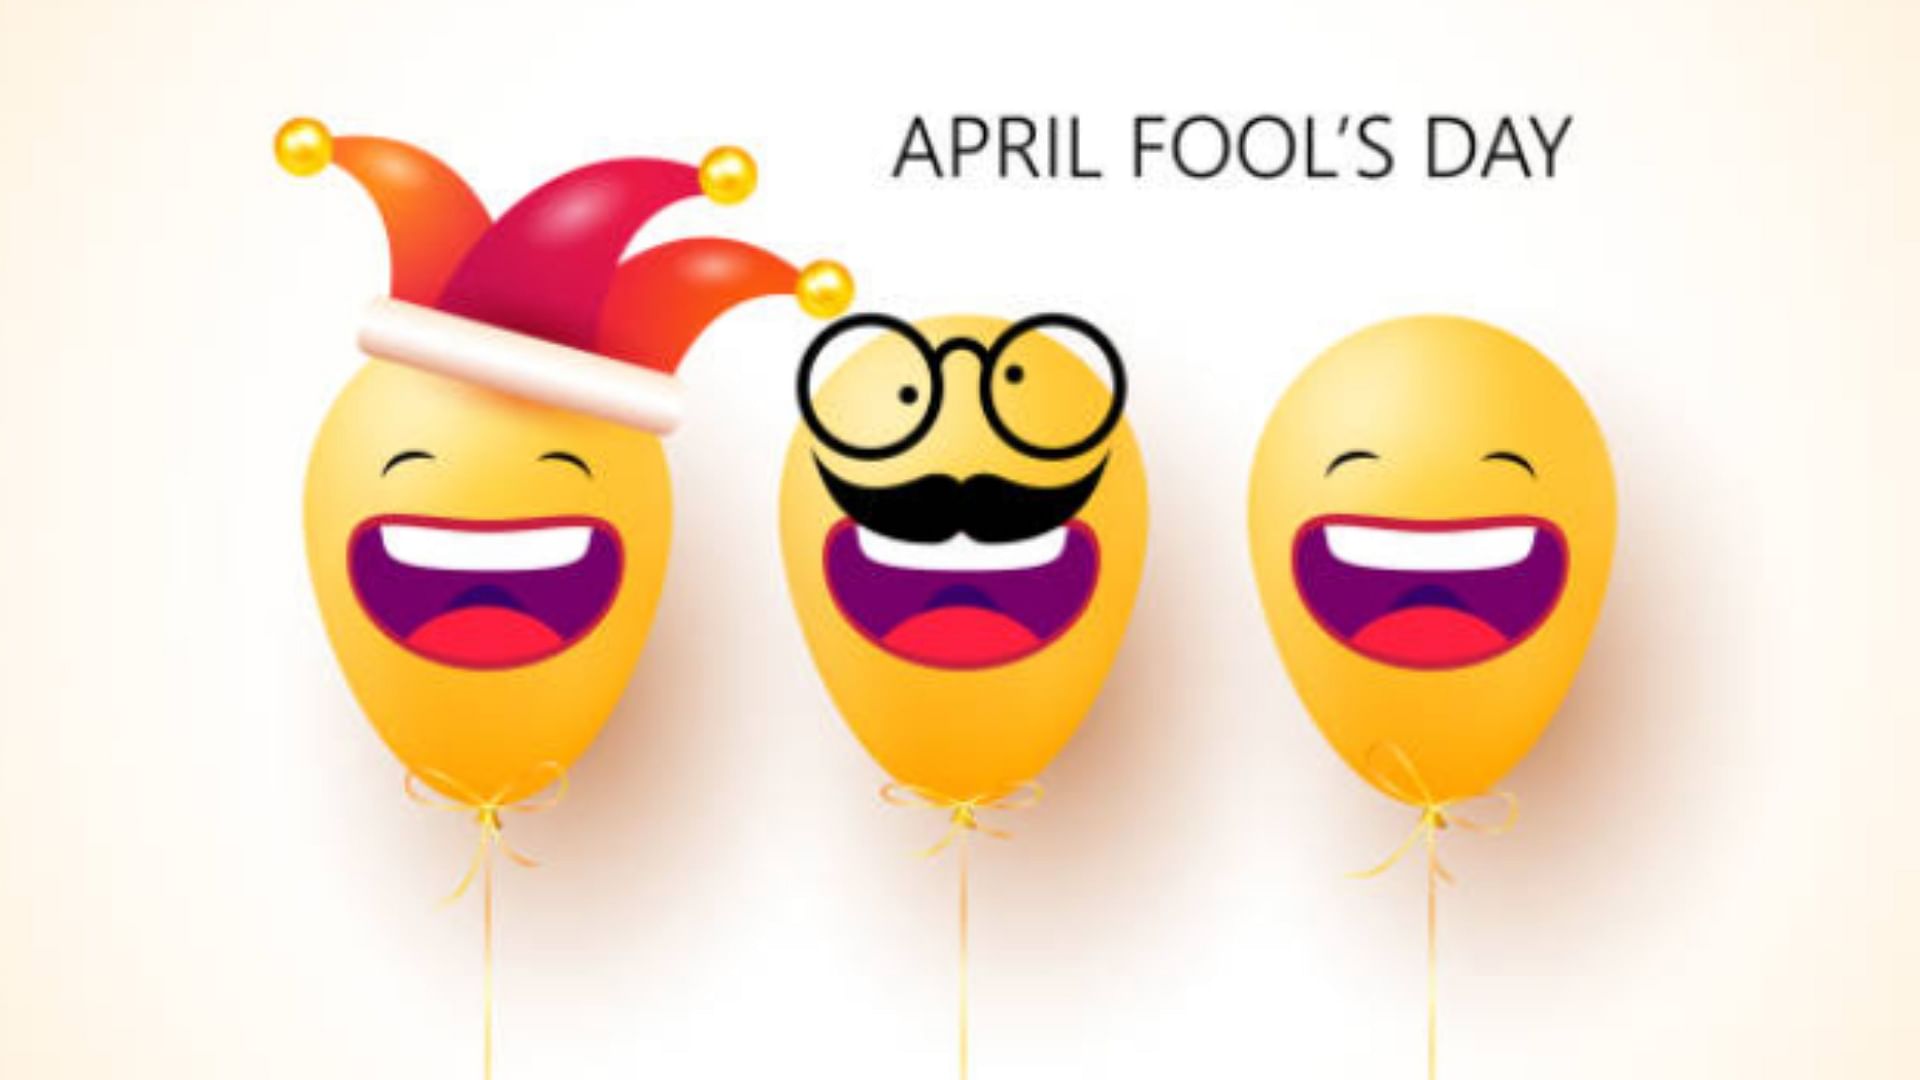 April Fools Jokes 2023: Share these funny jokes with your friends on April Fools day